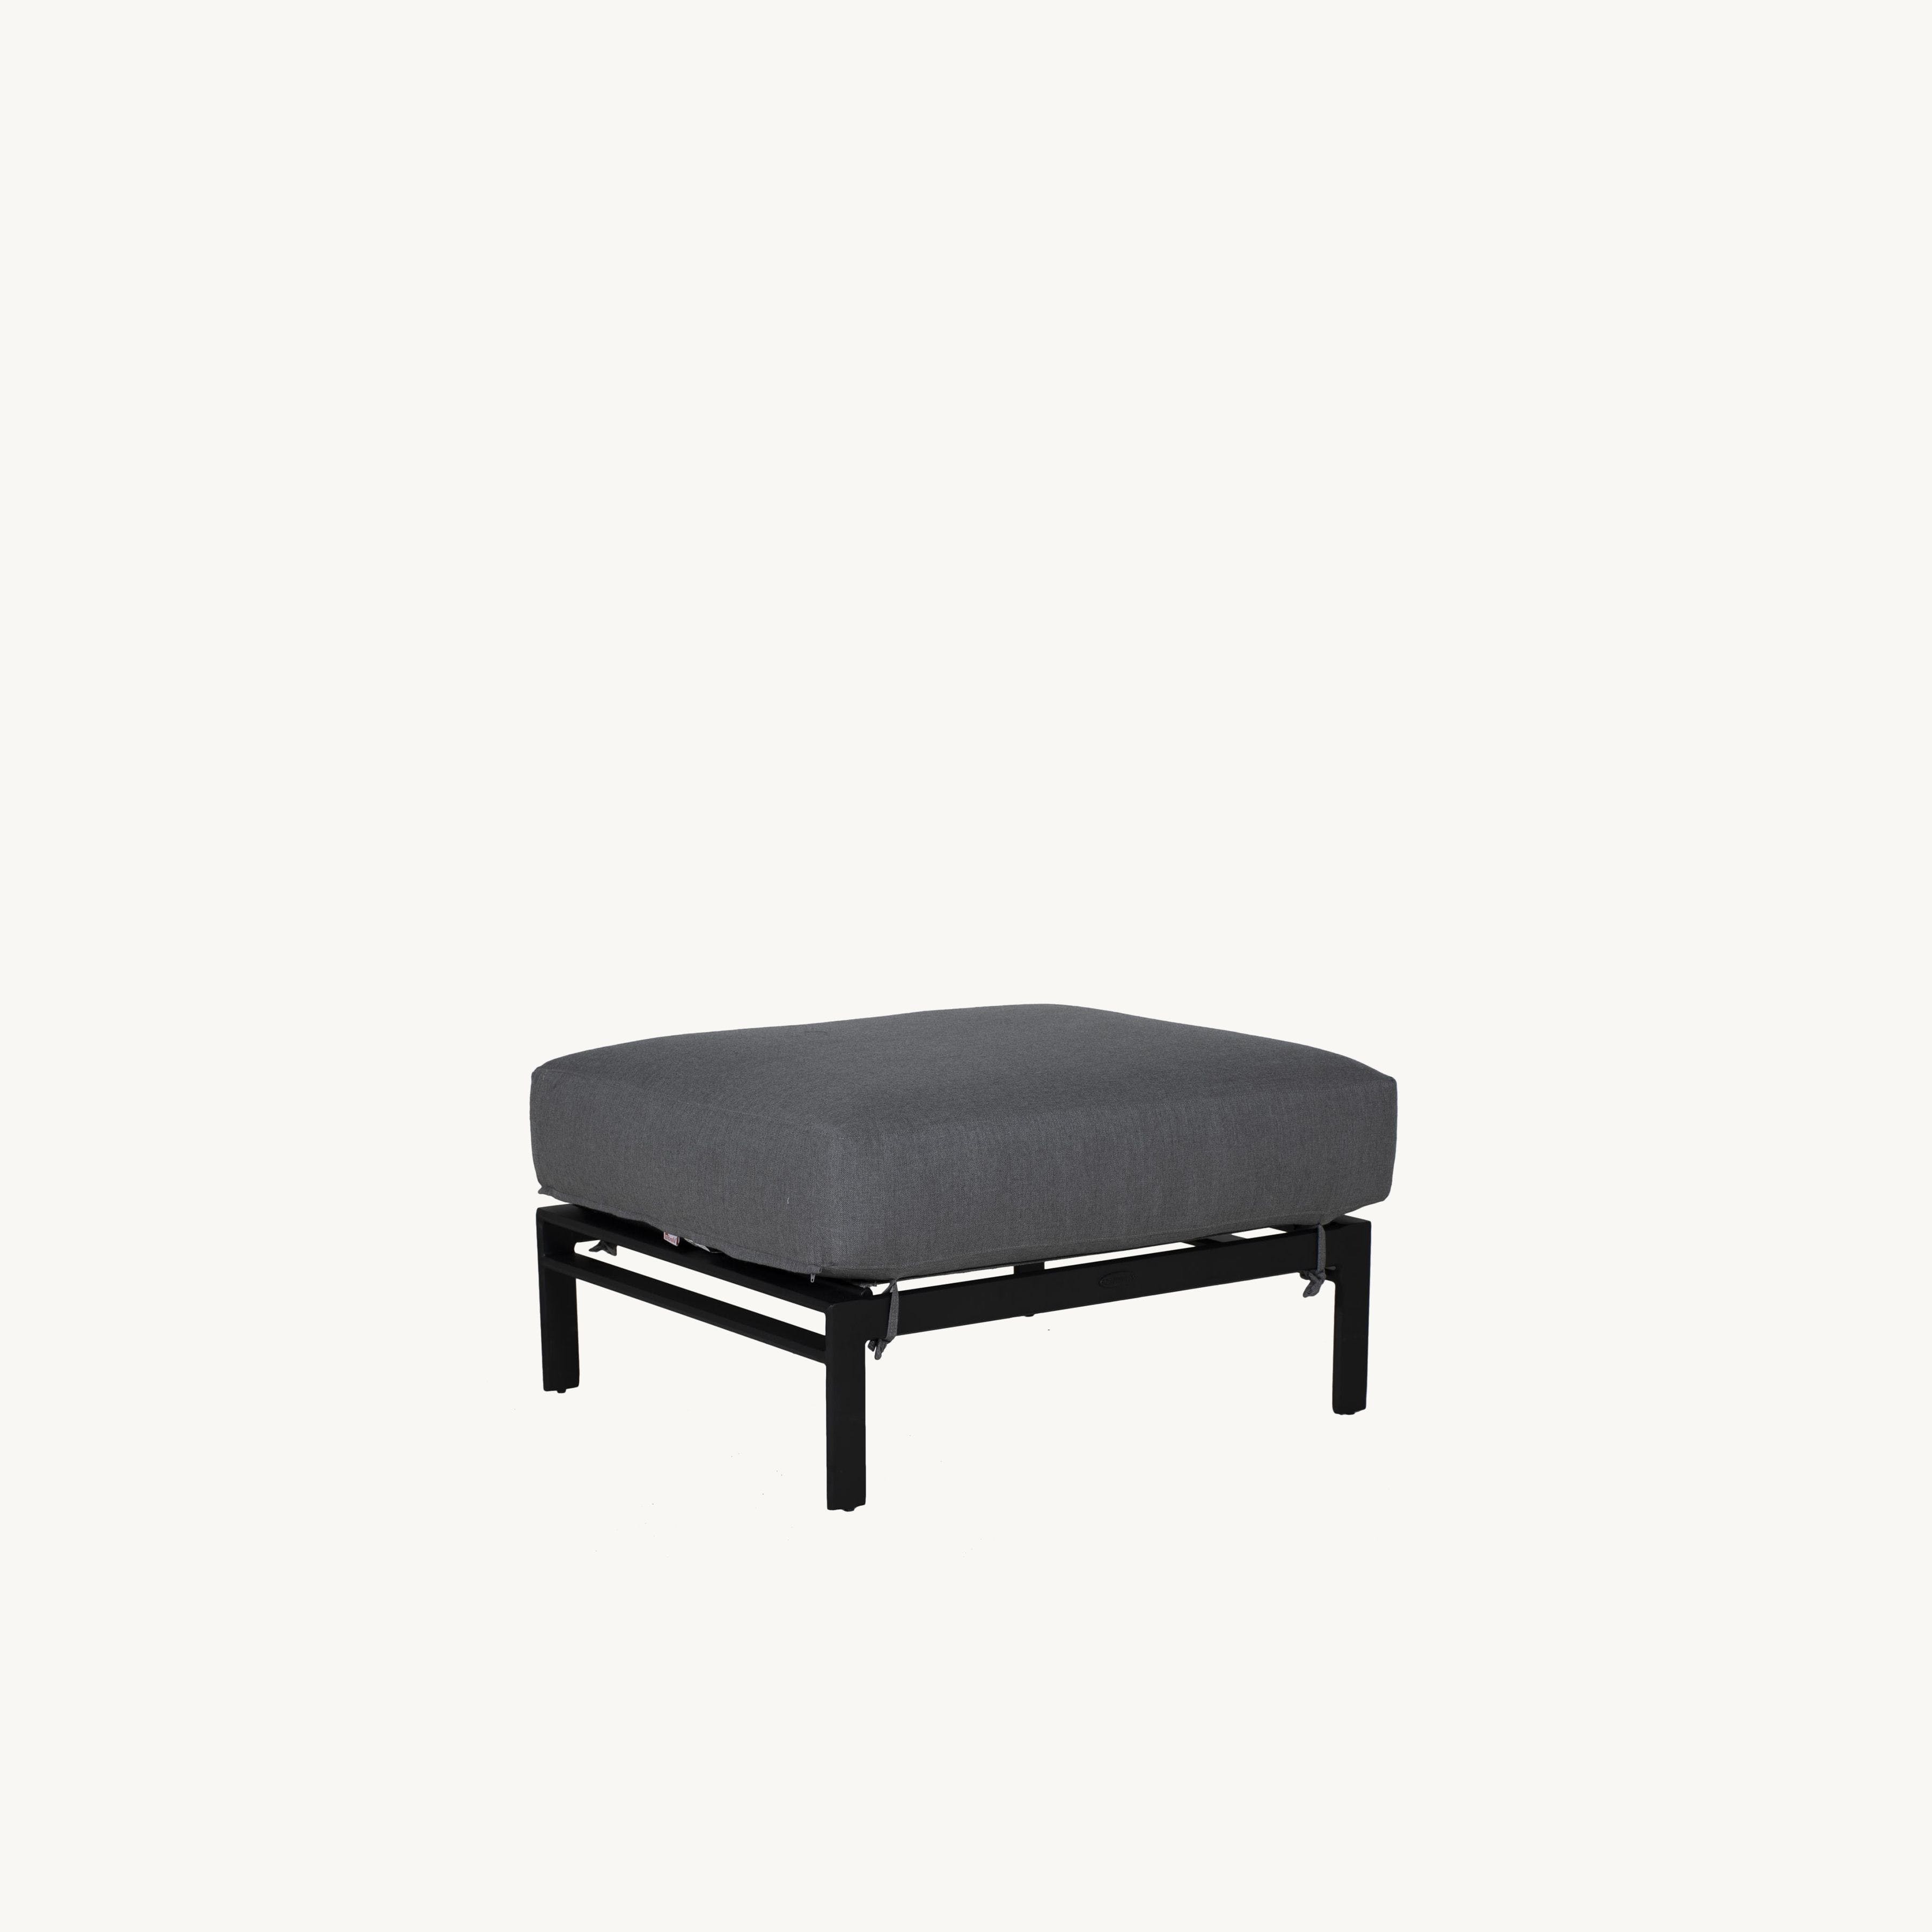 Prism Sectional Lounge Ottoman By Castelle